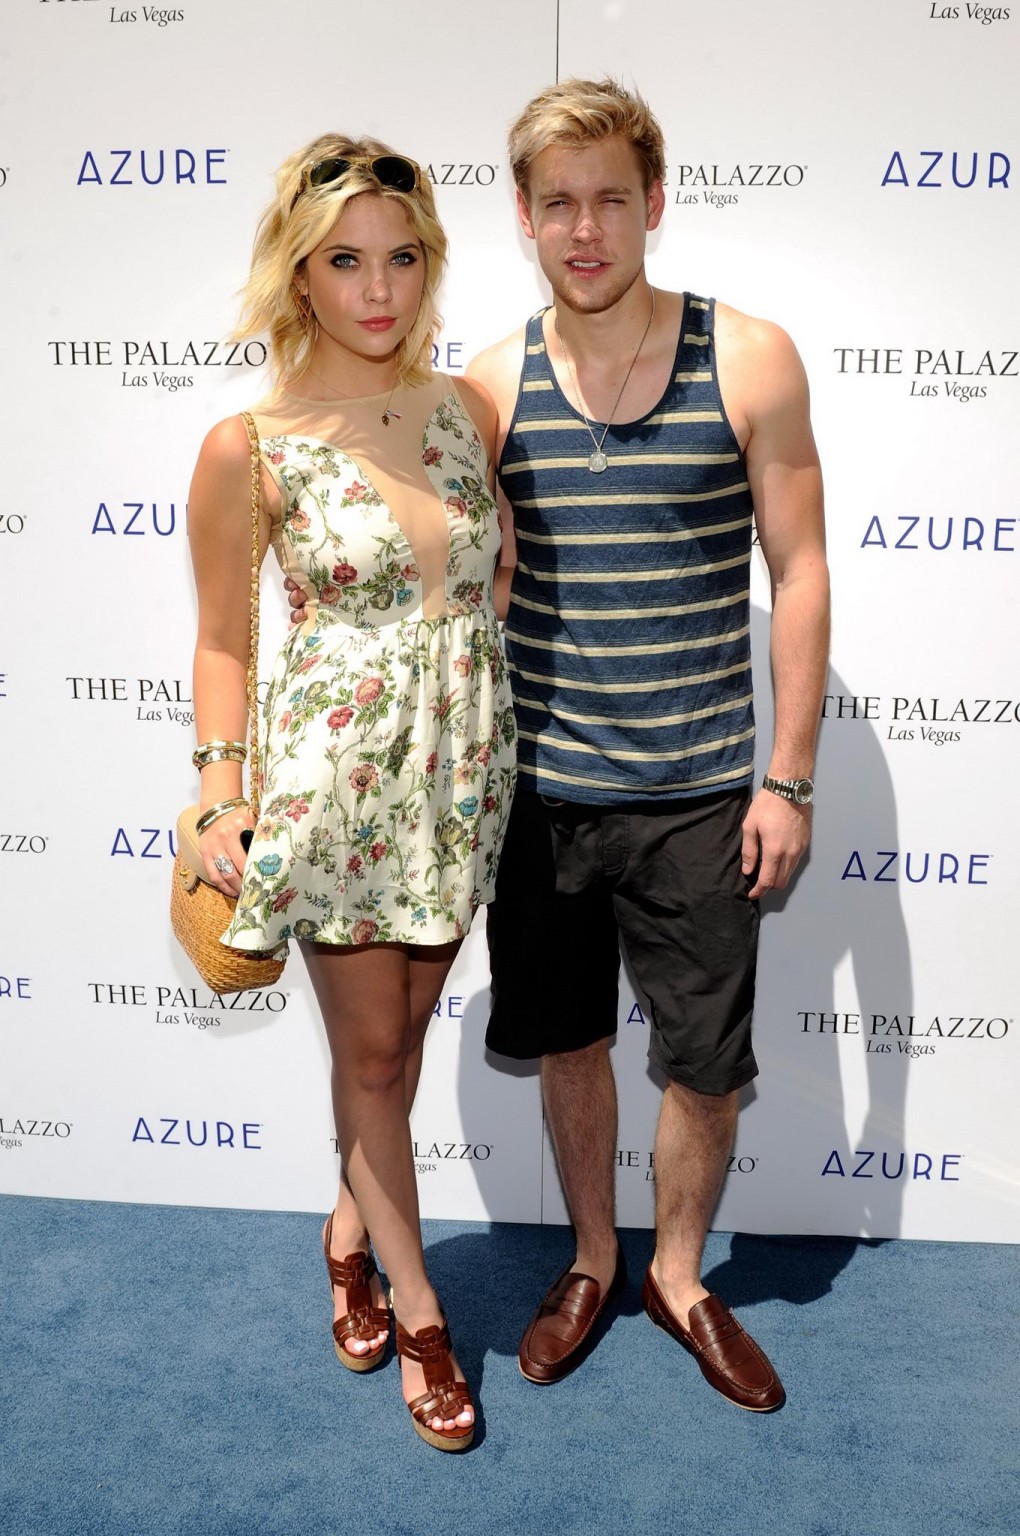 Ashley Benson cleavy showing side boob in a flower print mini dress at Azure poo #75253669